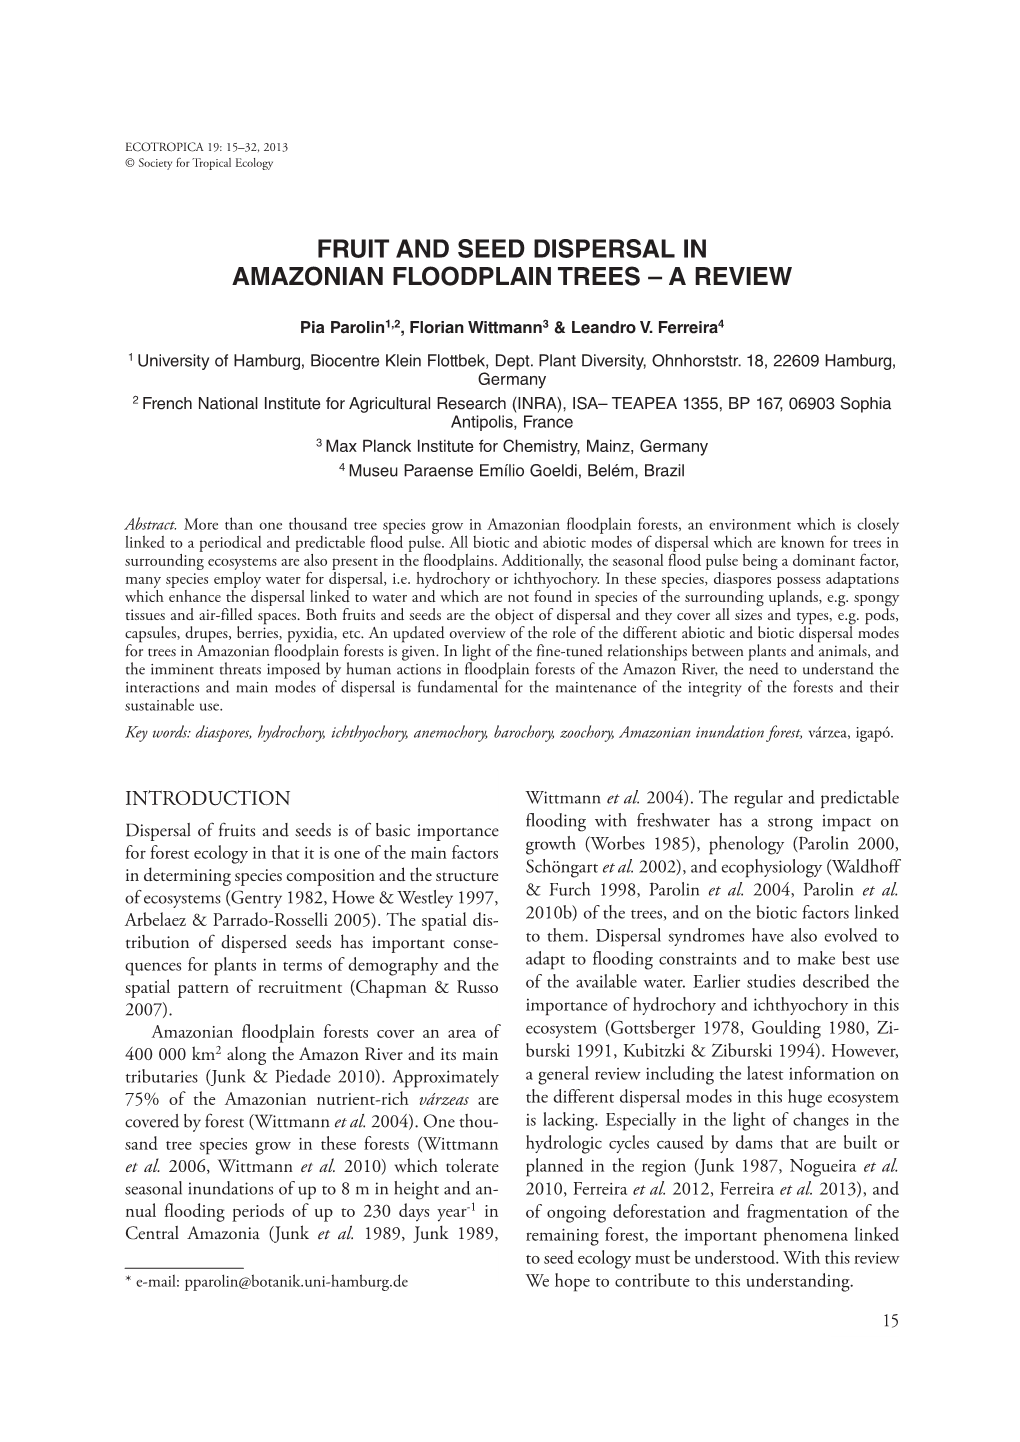 Fruit and Seed Dispersal in Amazonian Floodplain Trees – a Review